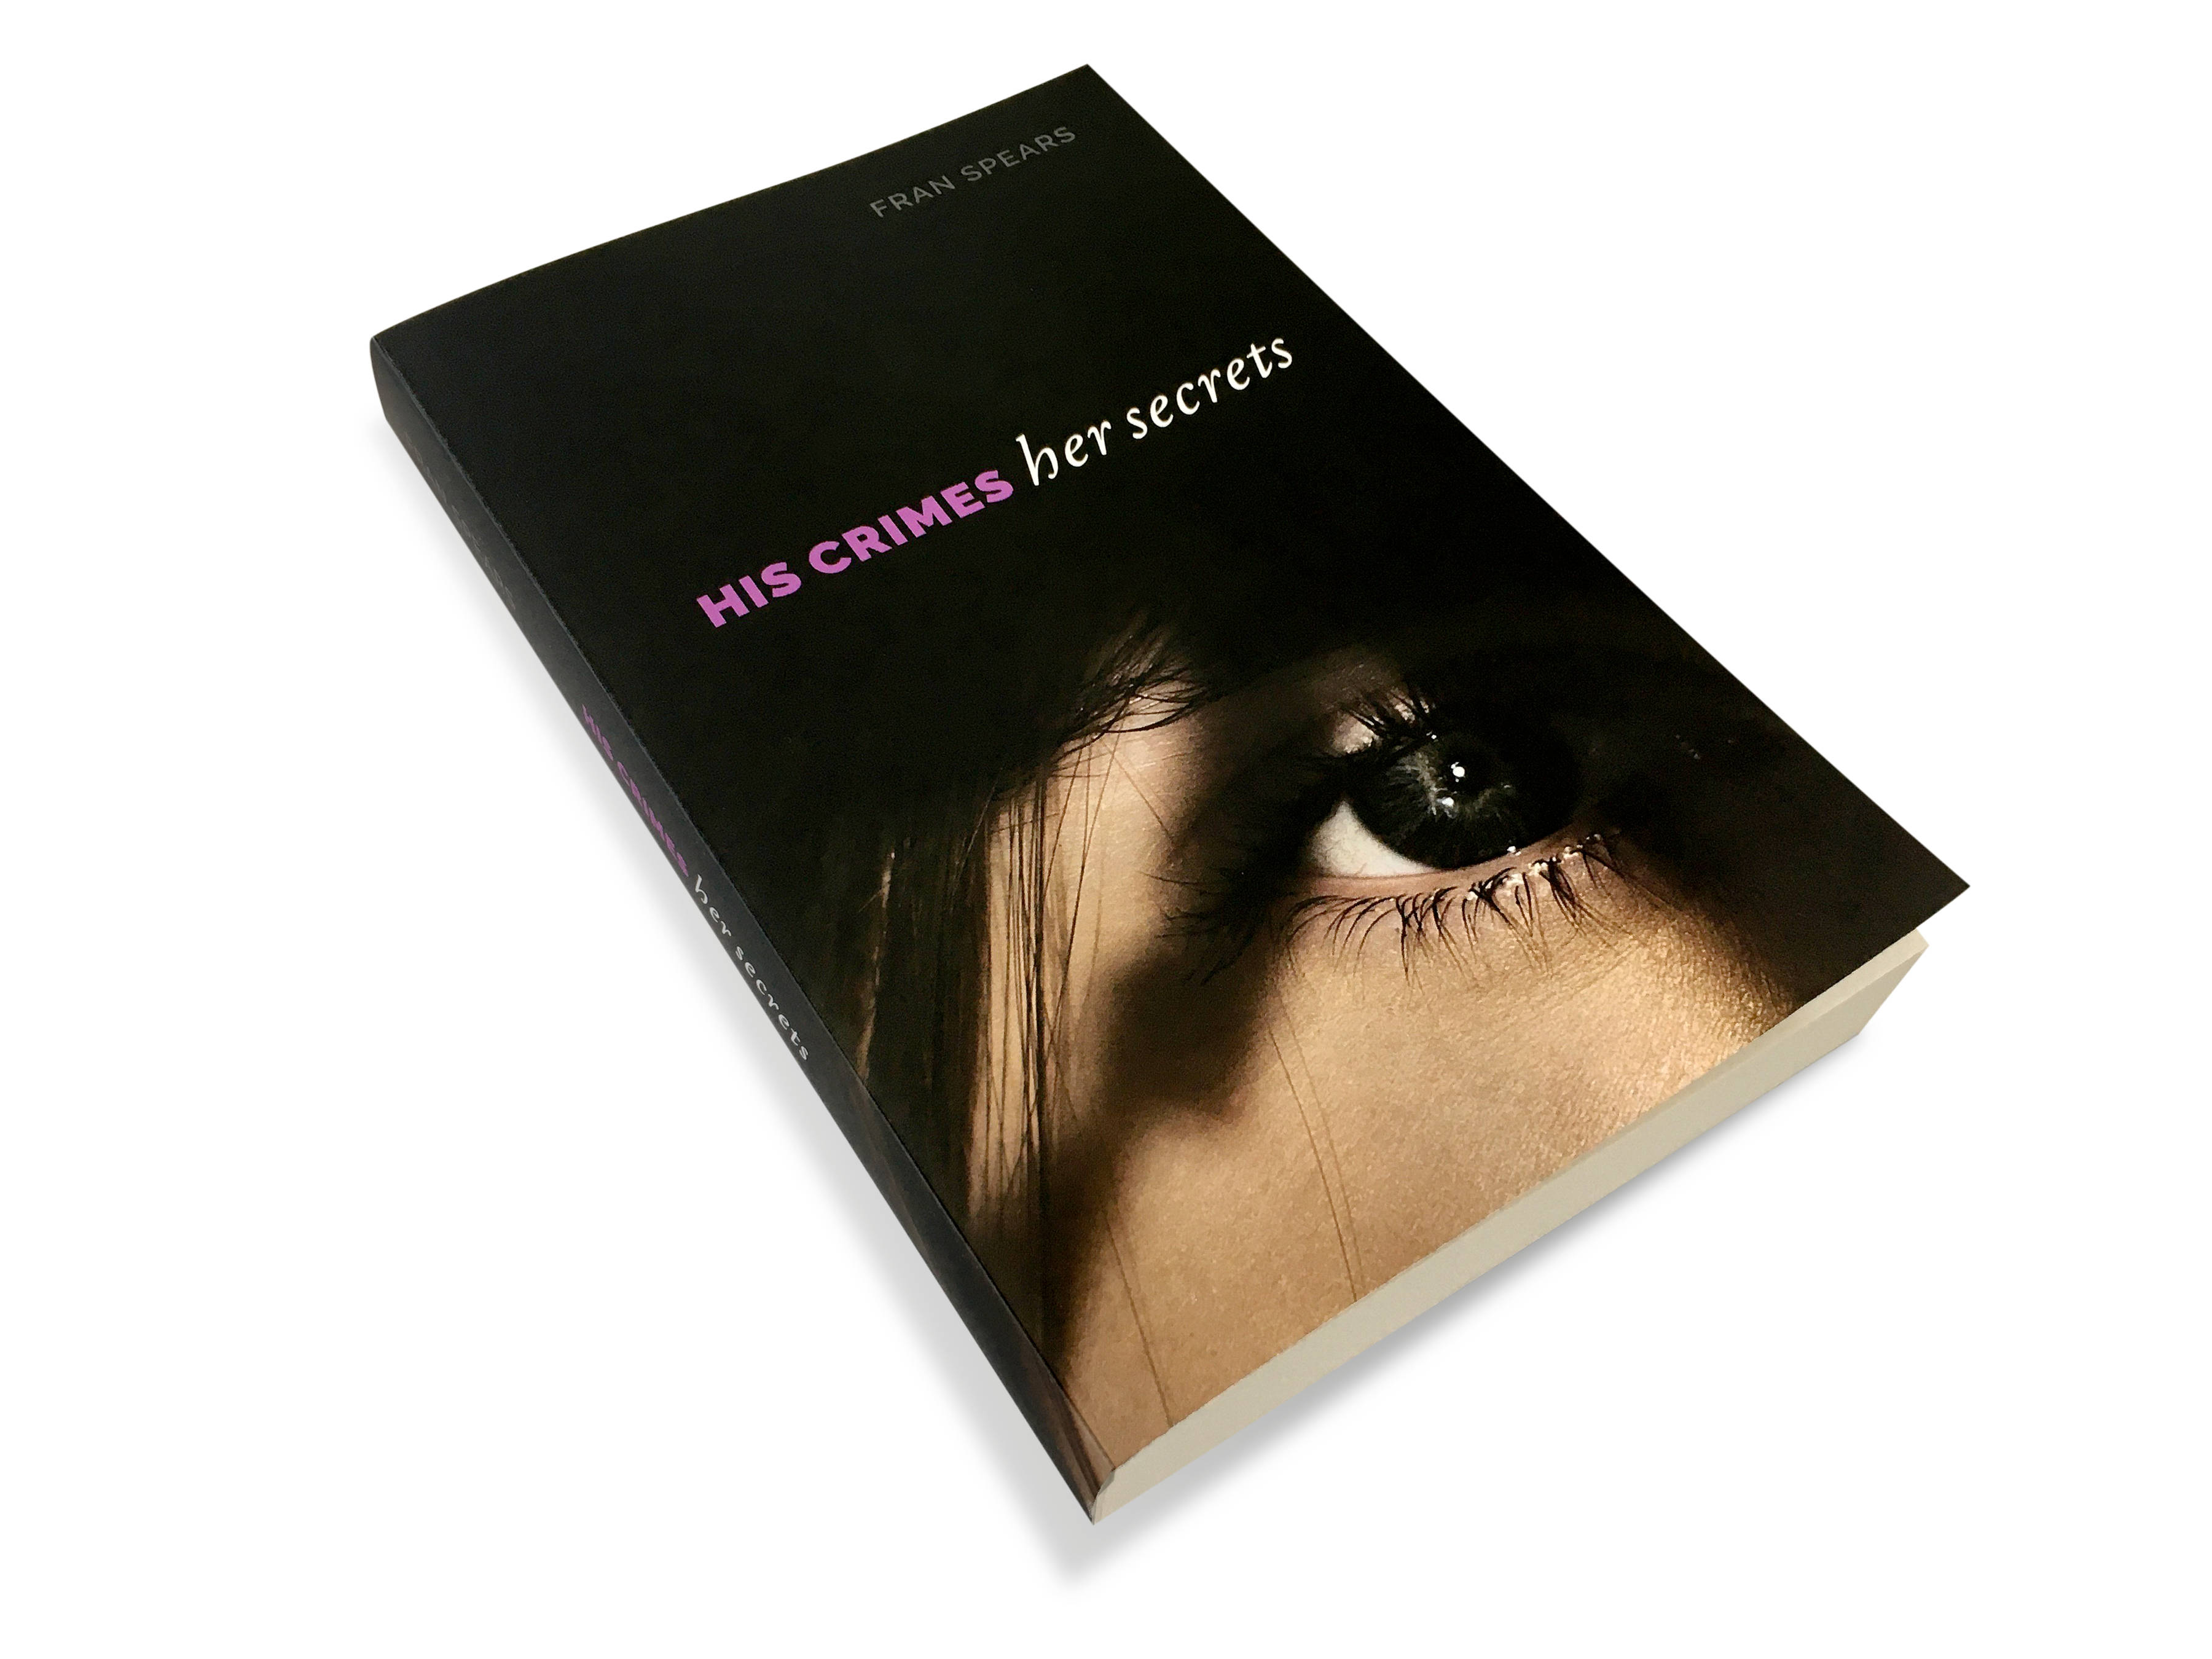 The book cover of ‘His Crimes Her Secrets’ by Fran Spears showing a shadowy close-up photo of part of a woman’s face.